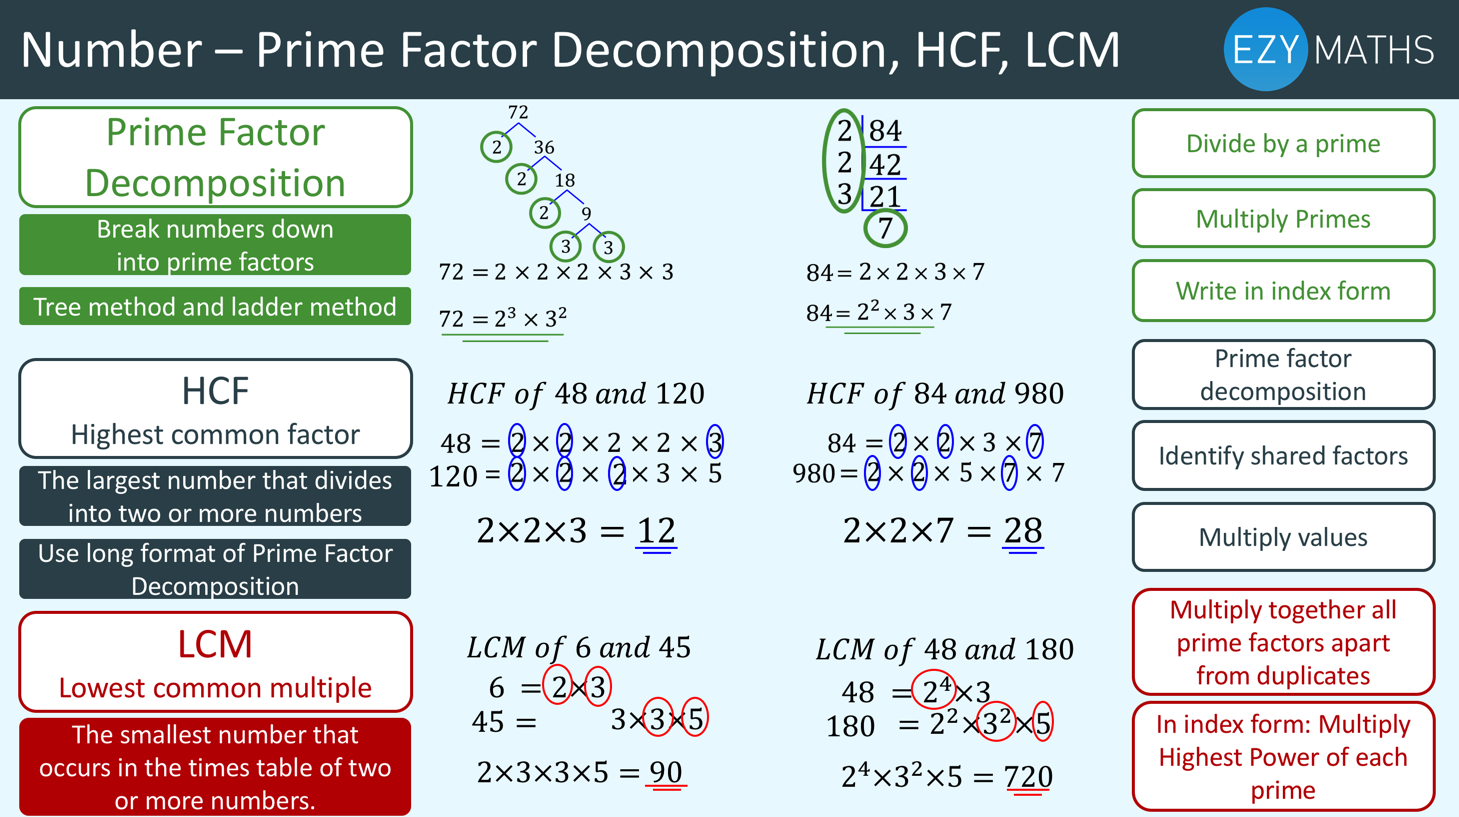 Common value. Decomposition of numbers into Prime Factors.. Prime Factors of number. How to find LCM and HCF of two numbers. Prime Factors в математике.